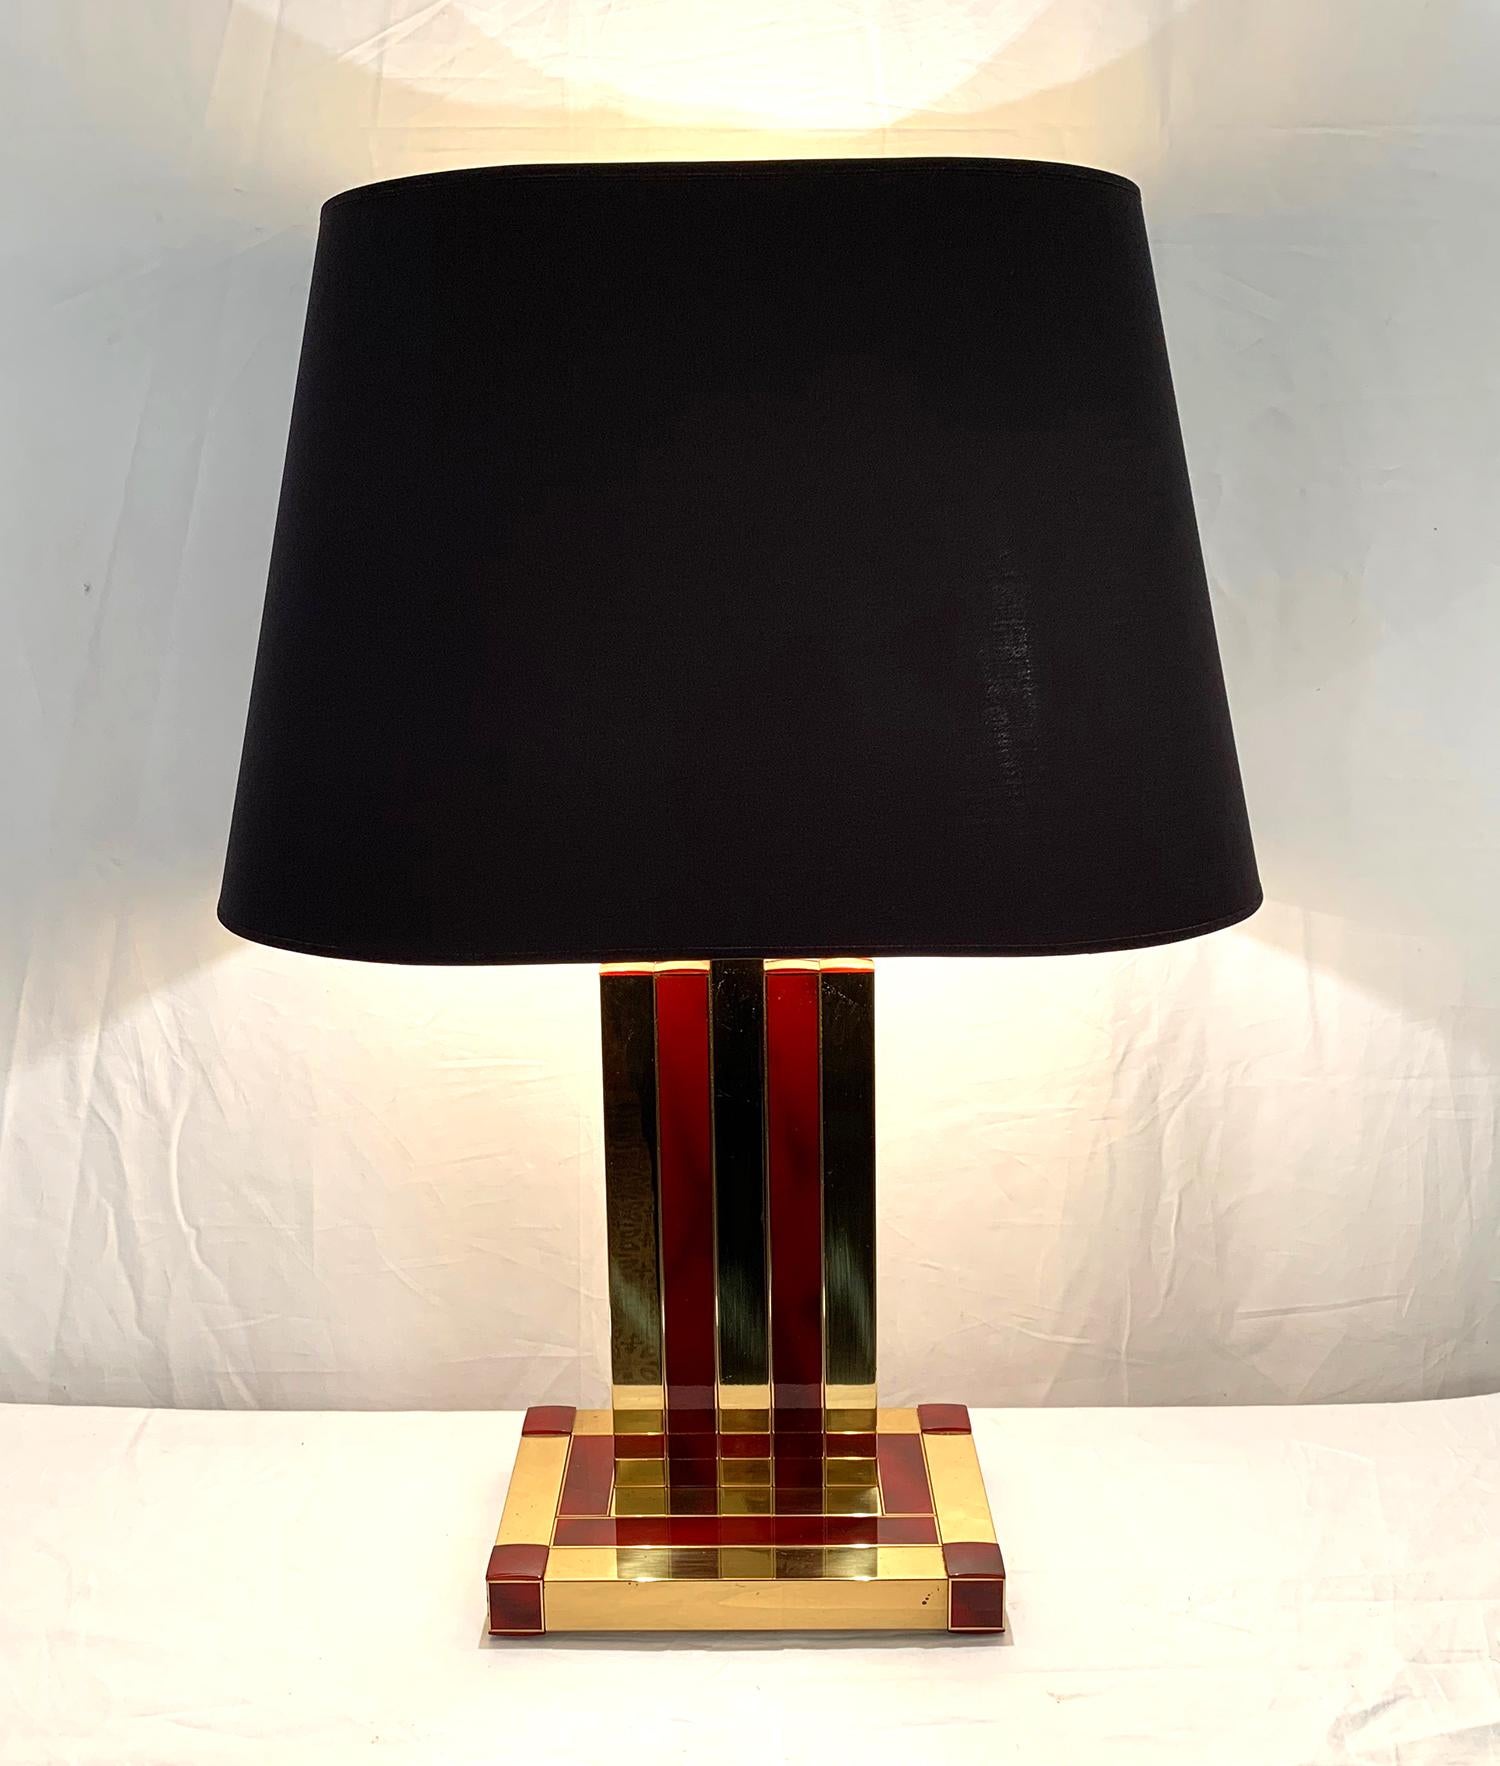 Very nice table lamp in brass and tortoiseshell resin designed by Willy Rizzo for Lumica, 1970. The shade in black cotton, gold interior is new.

Très belle lampe de table en laiton et résine écaille de tortue dessinée par Willy Rizzo pour Lumica,